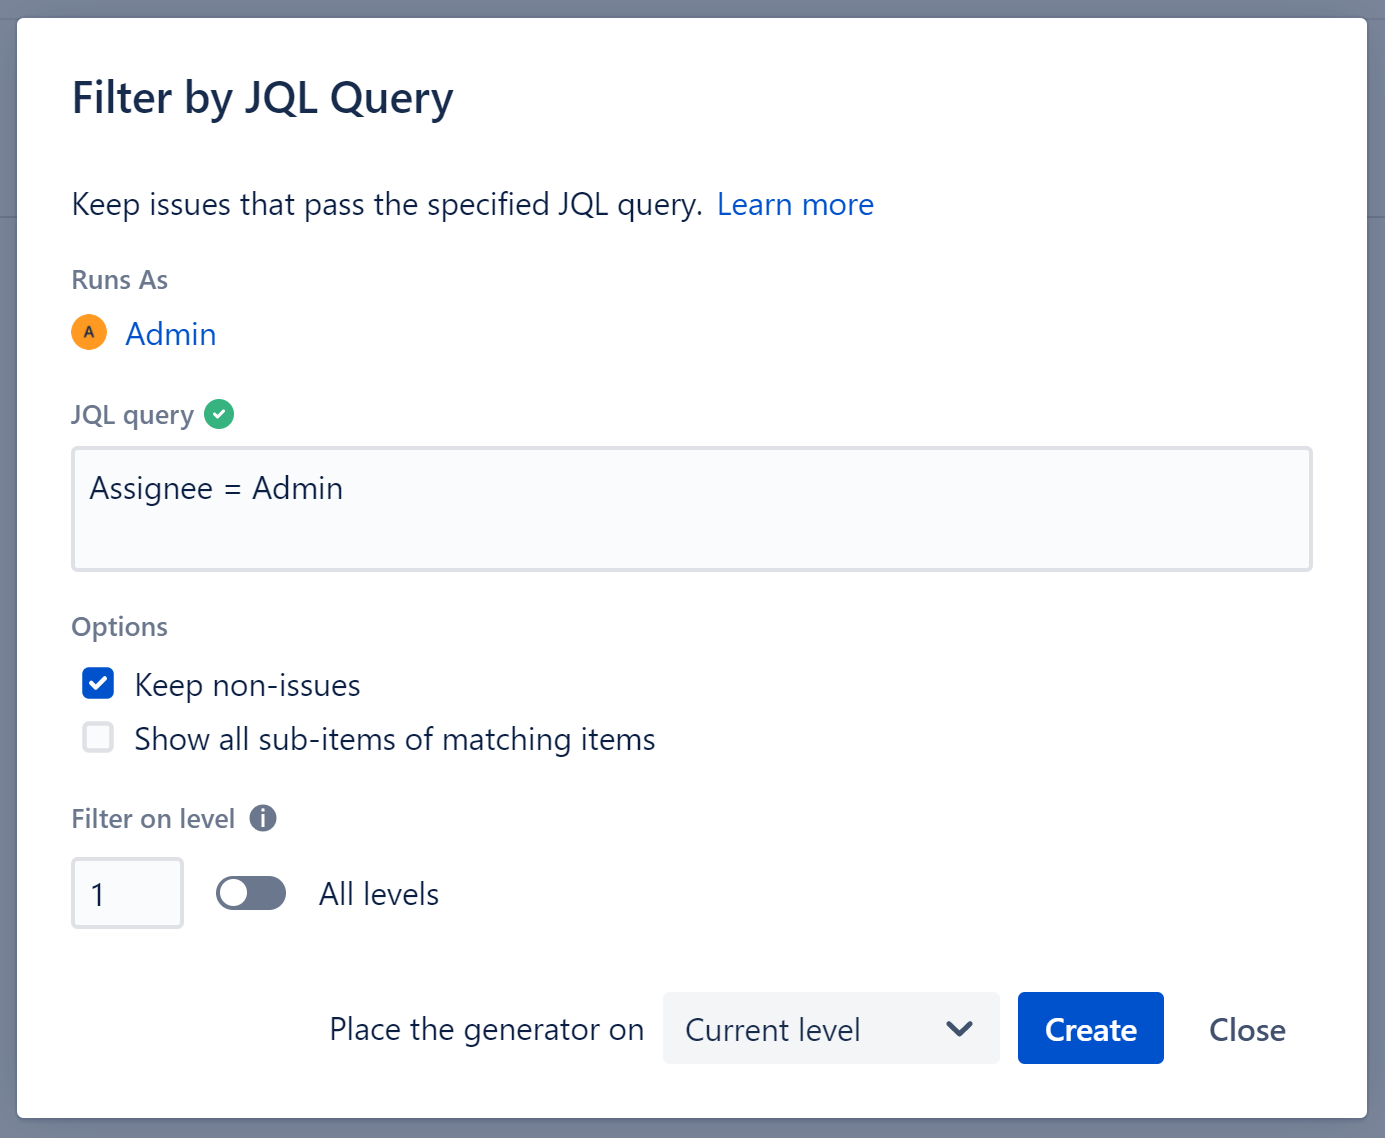 Filter by JQL Query settings